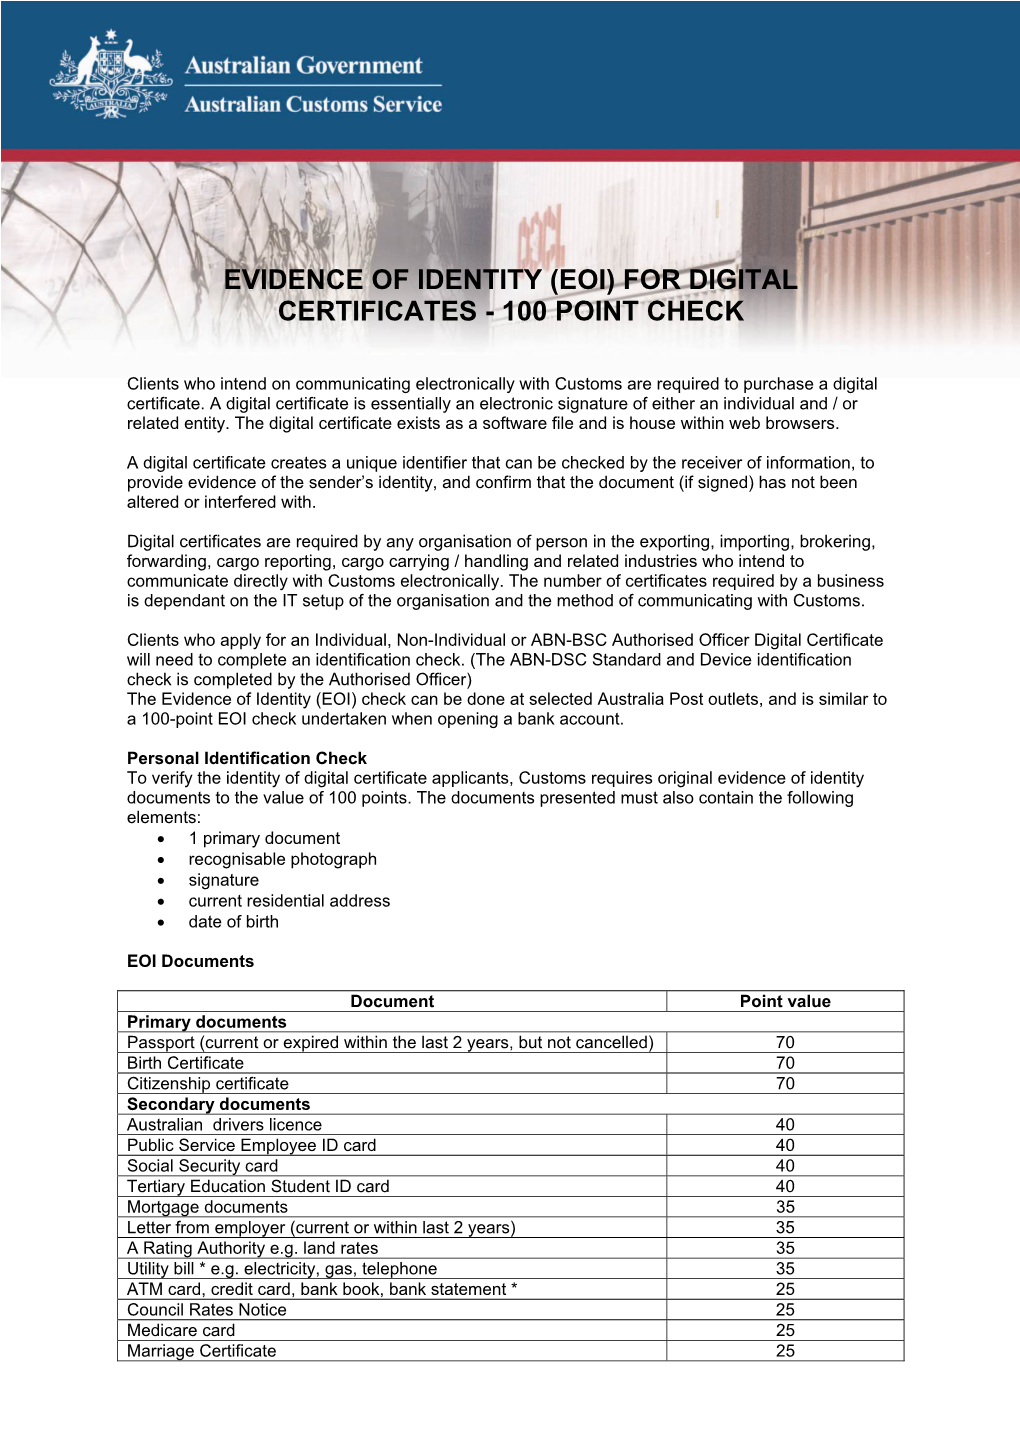 Evidence of Identity (Eoi) for Digital Certificates - 100 Point Check